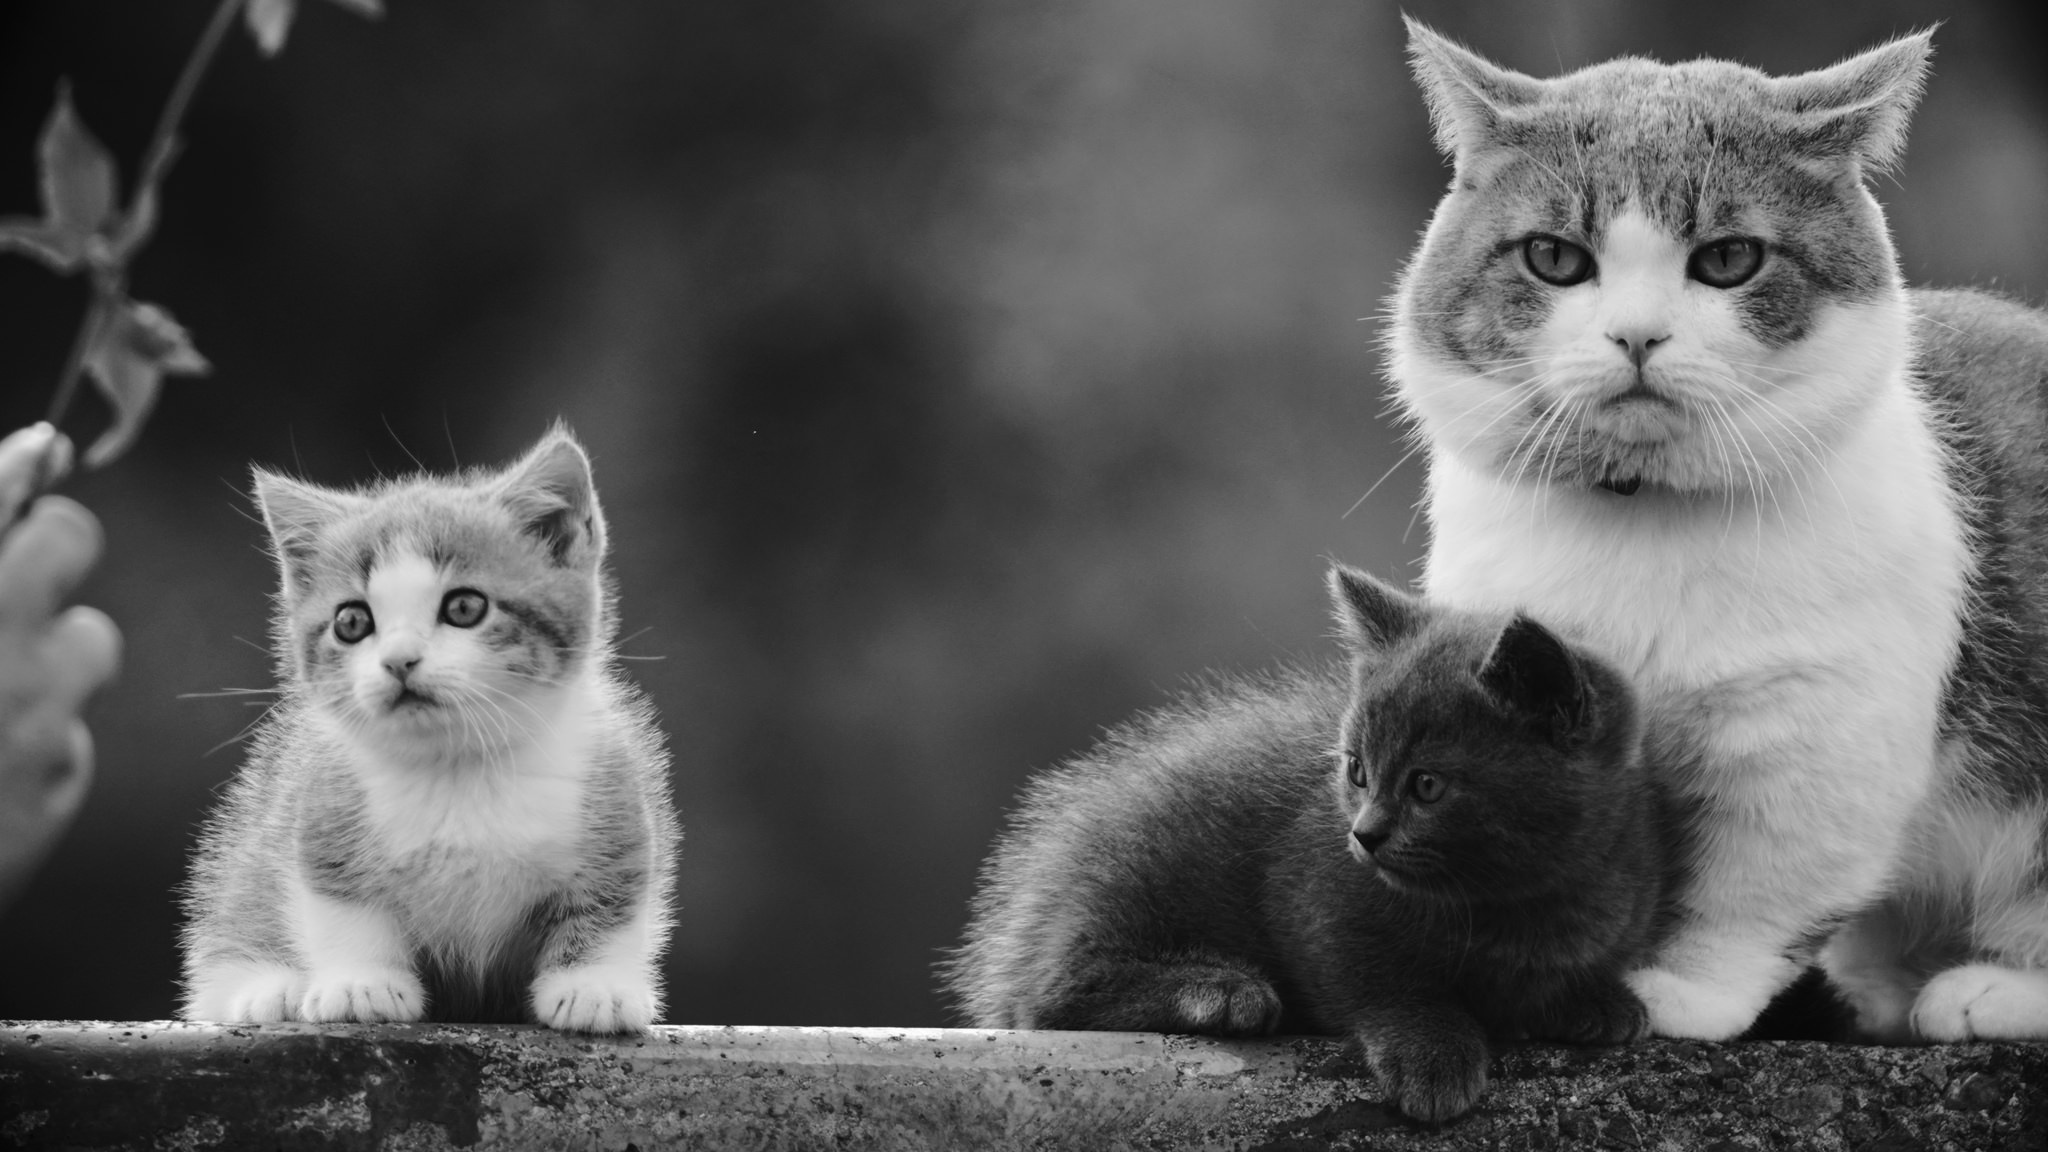 General 2048x1152 animals cats monochrome family